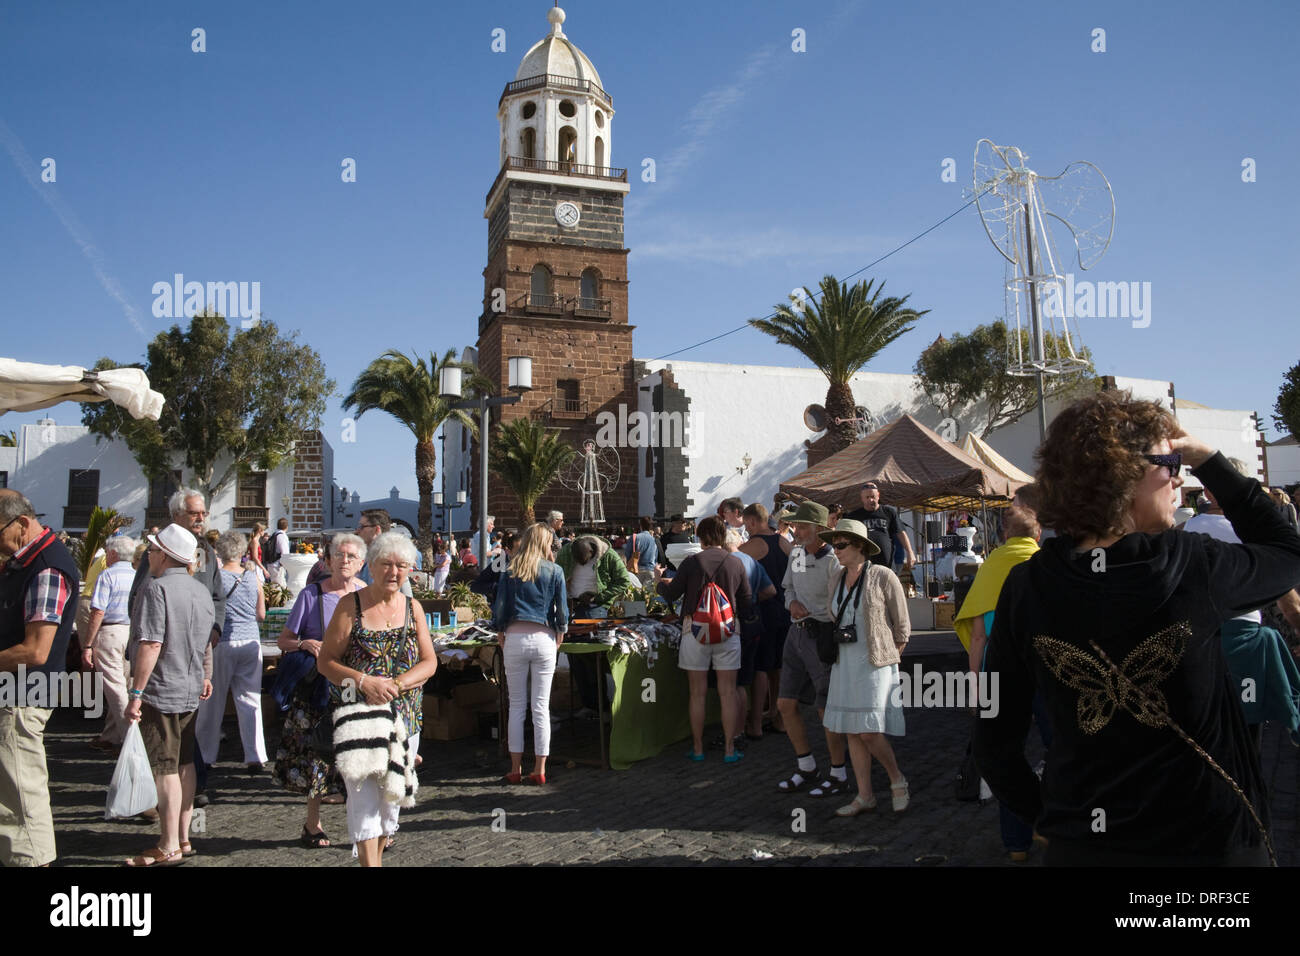 Teguise Lanzarote Canary Islands Busy with visitors to weekly Sunday market in central square Church of Our Lady of Guadalupe Stock Photo